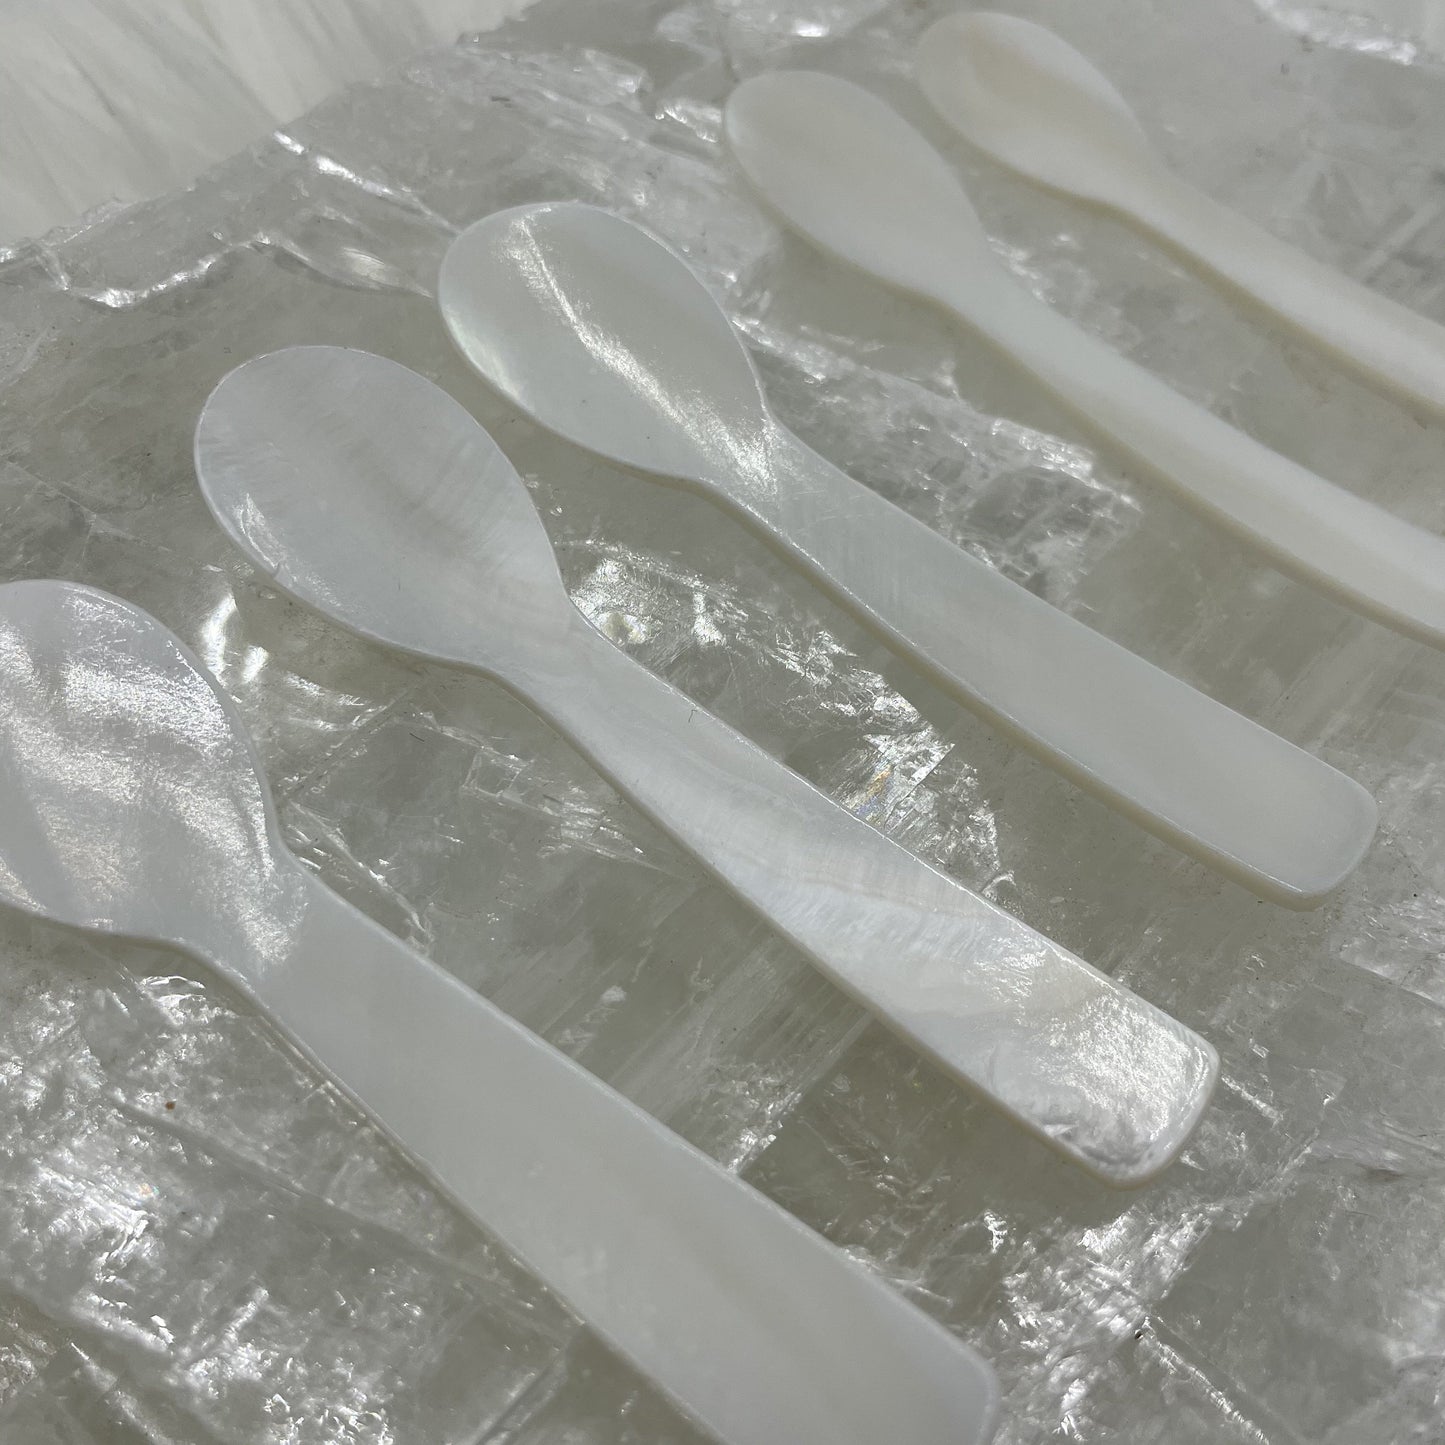 Mother of Pearl Caviar Spoons